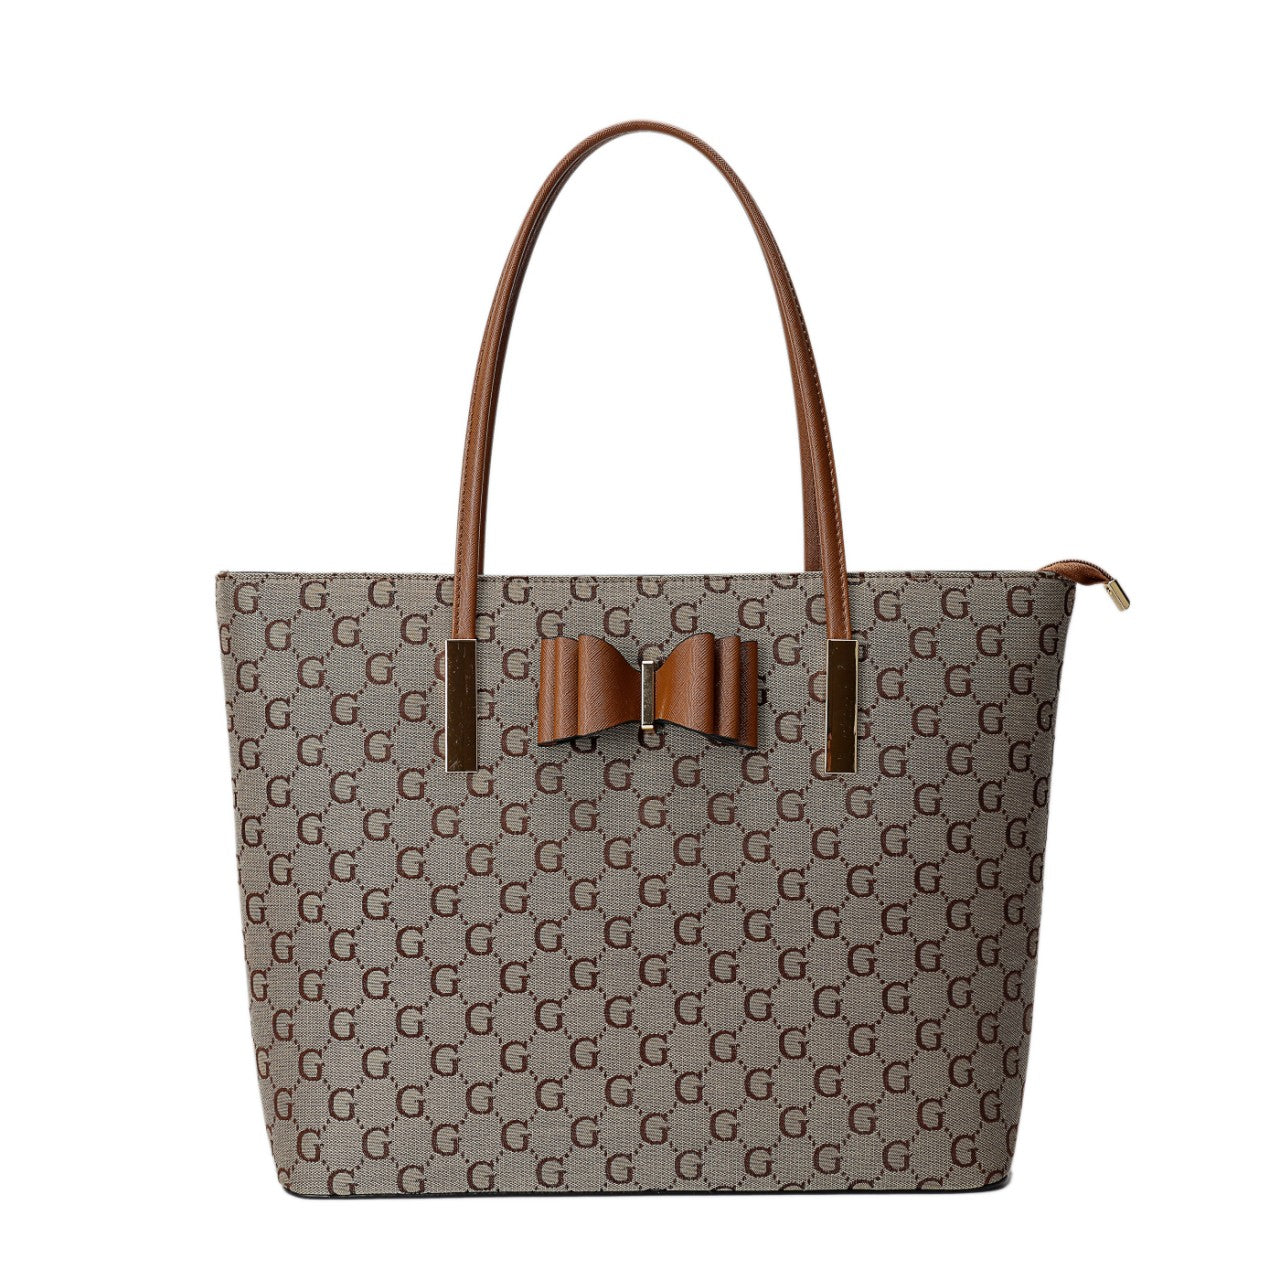 LYDC BOW DETAIL TOTE BAG